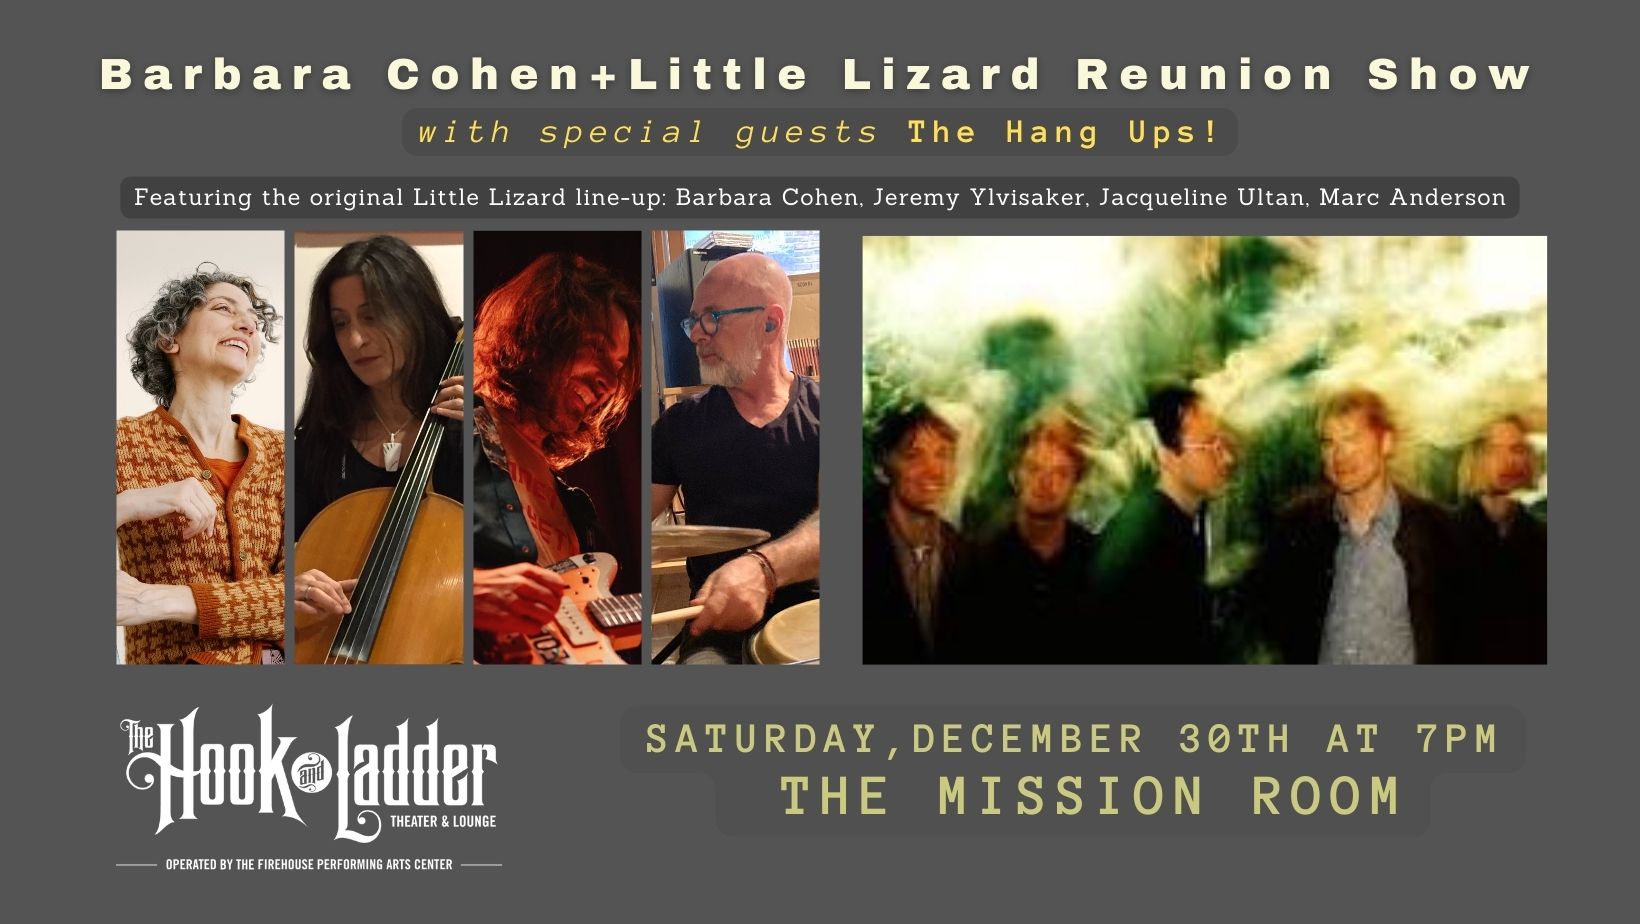 Barbara Cohen & Little Lizard Reunion Show with special guests The Hang Ups Saturday November 30 Mission Room at The Hook Doors 7:00pm :: Music 7:30pm :: 21+ General Admission * $10 ADV / $15 DOS * Does not include fees NO REFUNDS